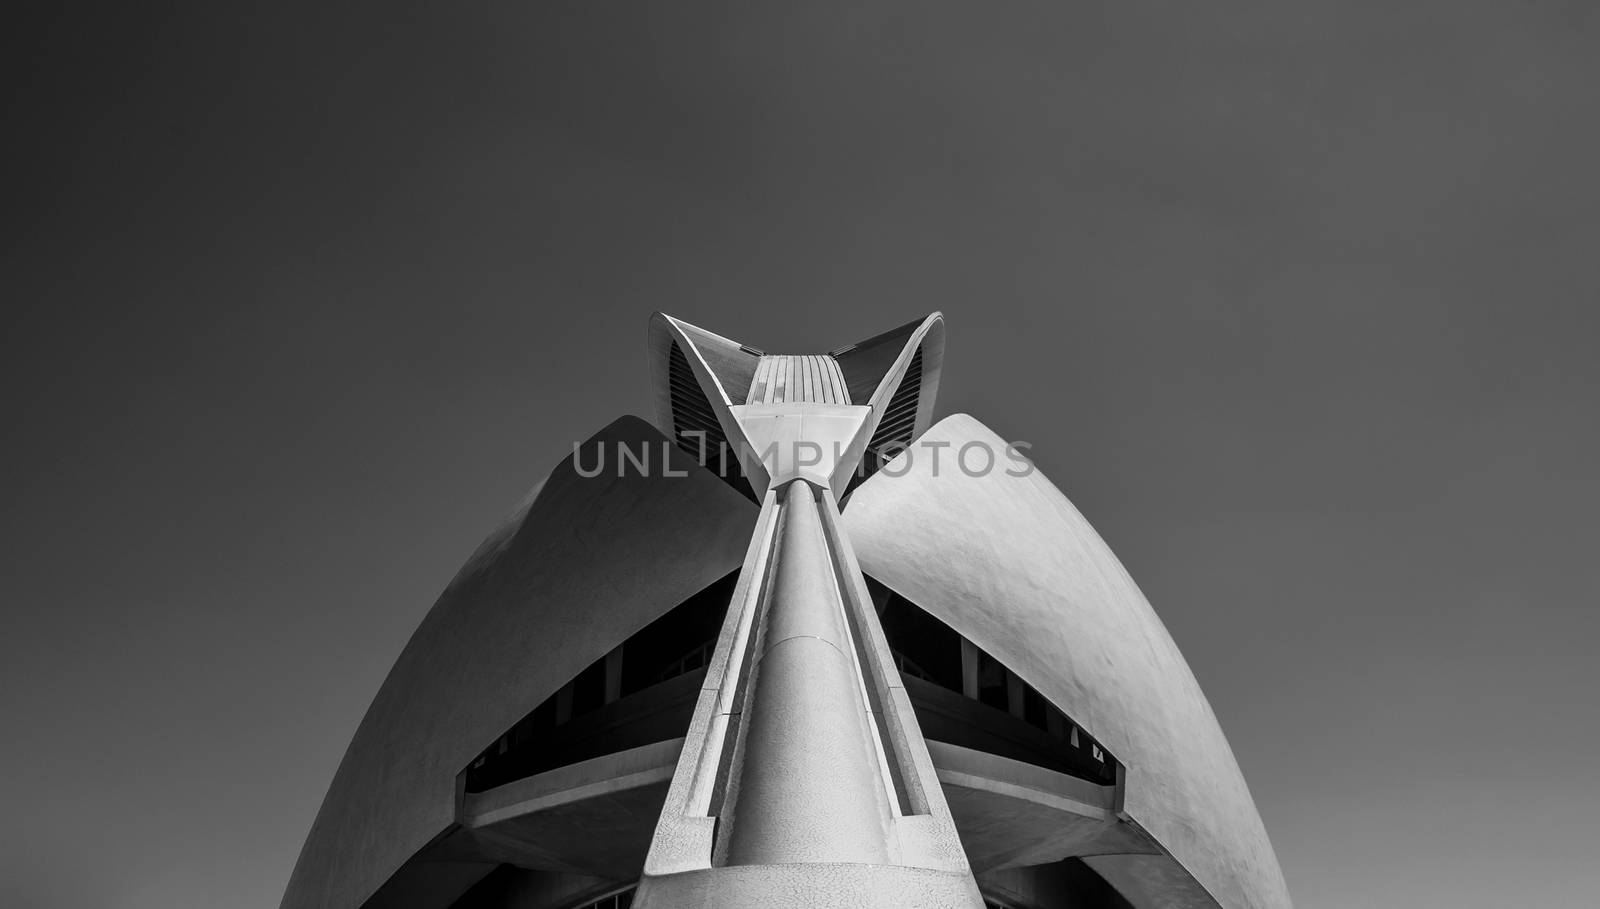 Valencia, Spain - 2013: Detail of the monumental dome of the palace of the arts in Valencia. Building made for the creation, the promotion and the diffusion of all the arts